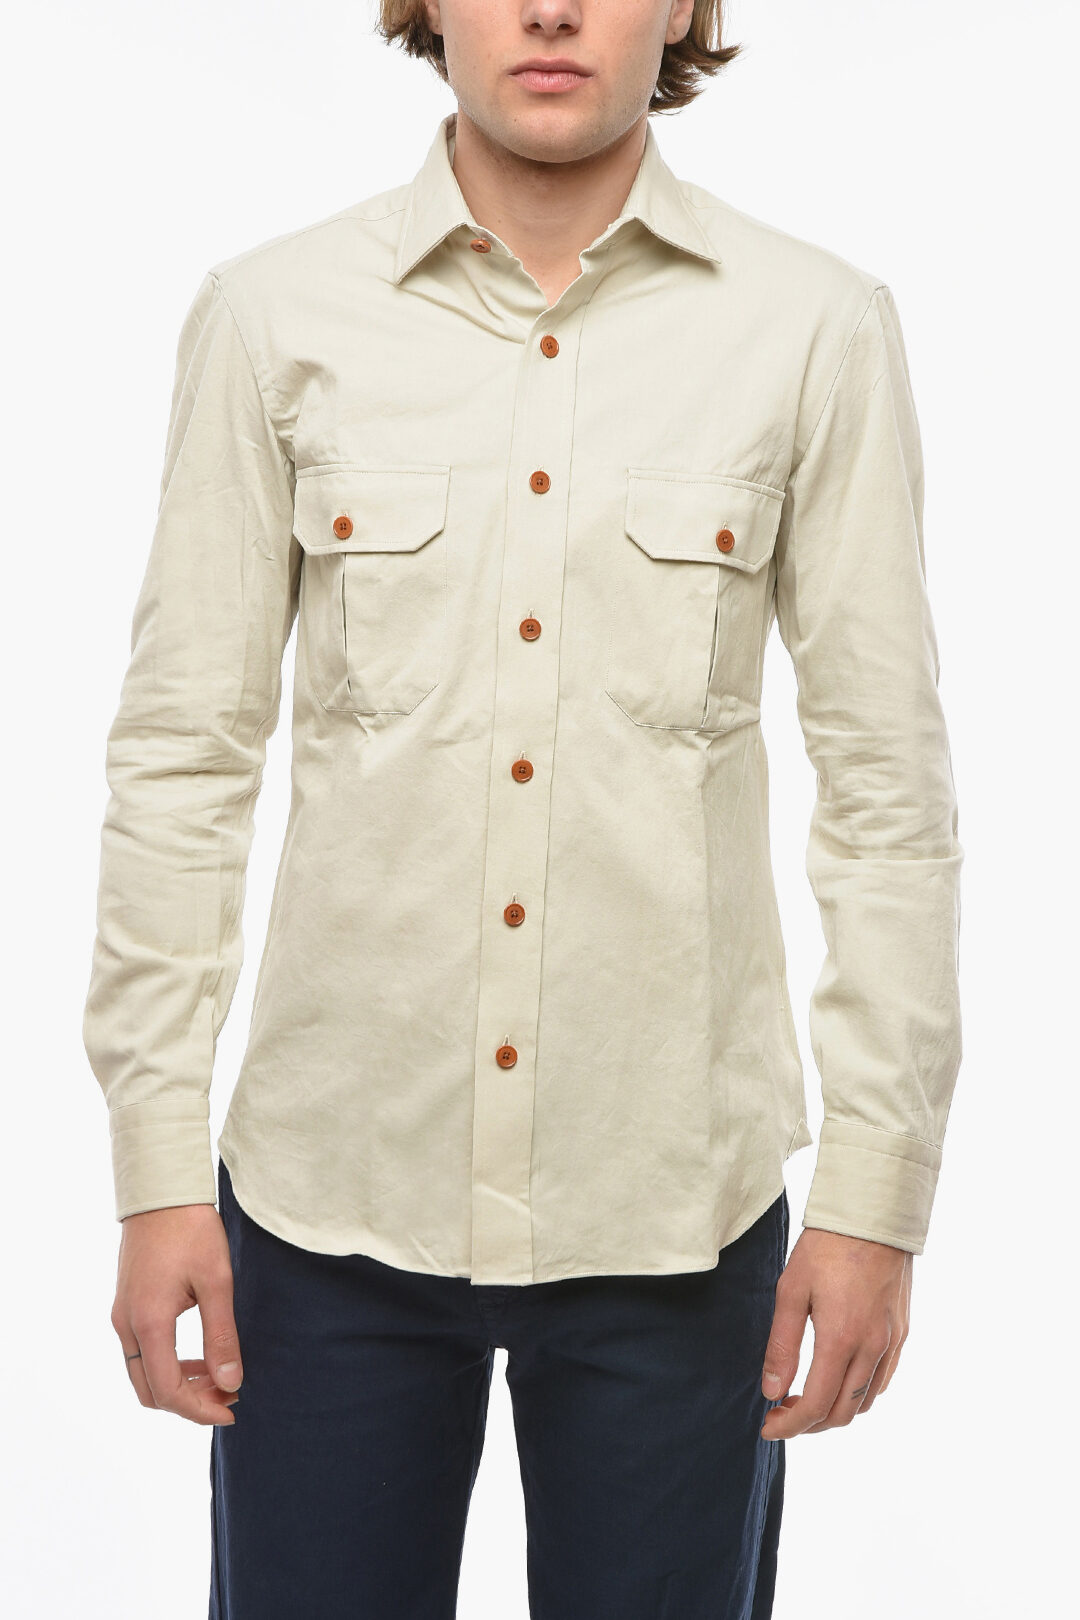 Salvatore Piccolo Cotton Shirt with Double Breast Pocket men - Glamood ...